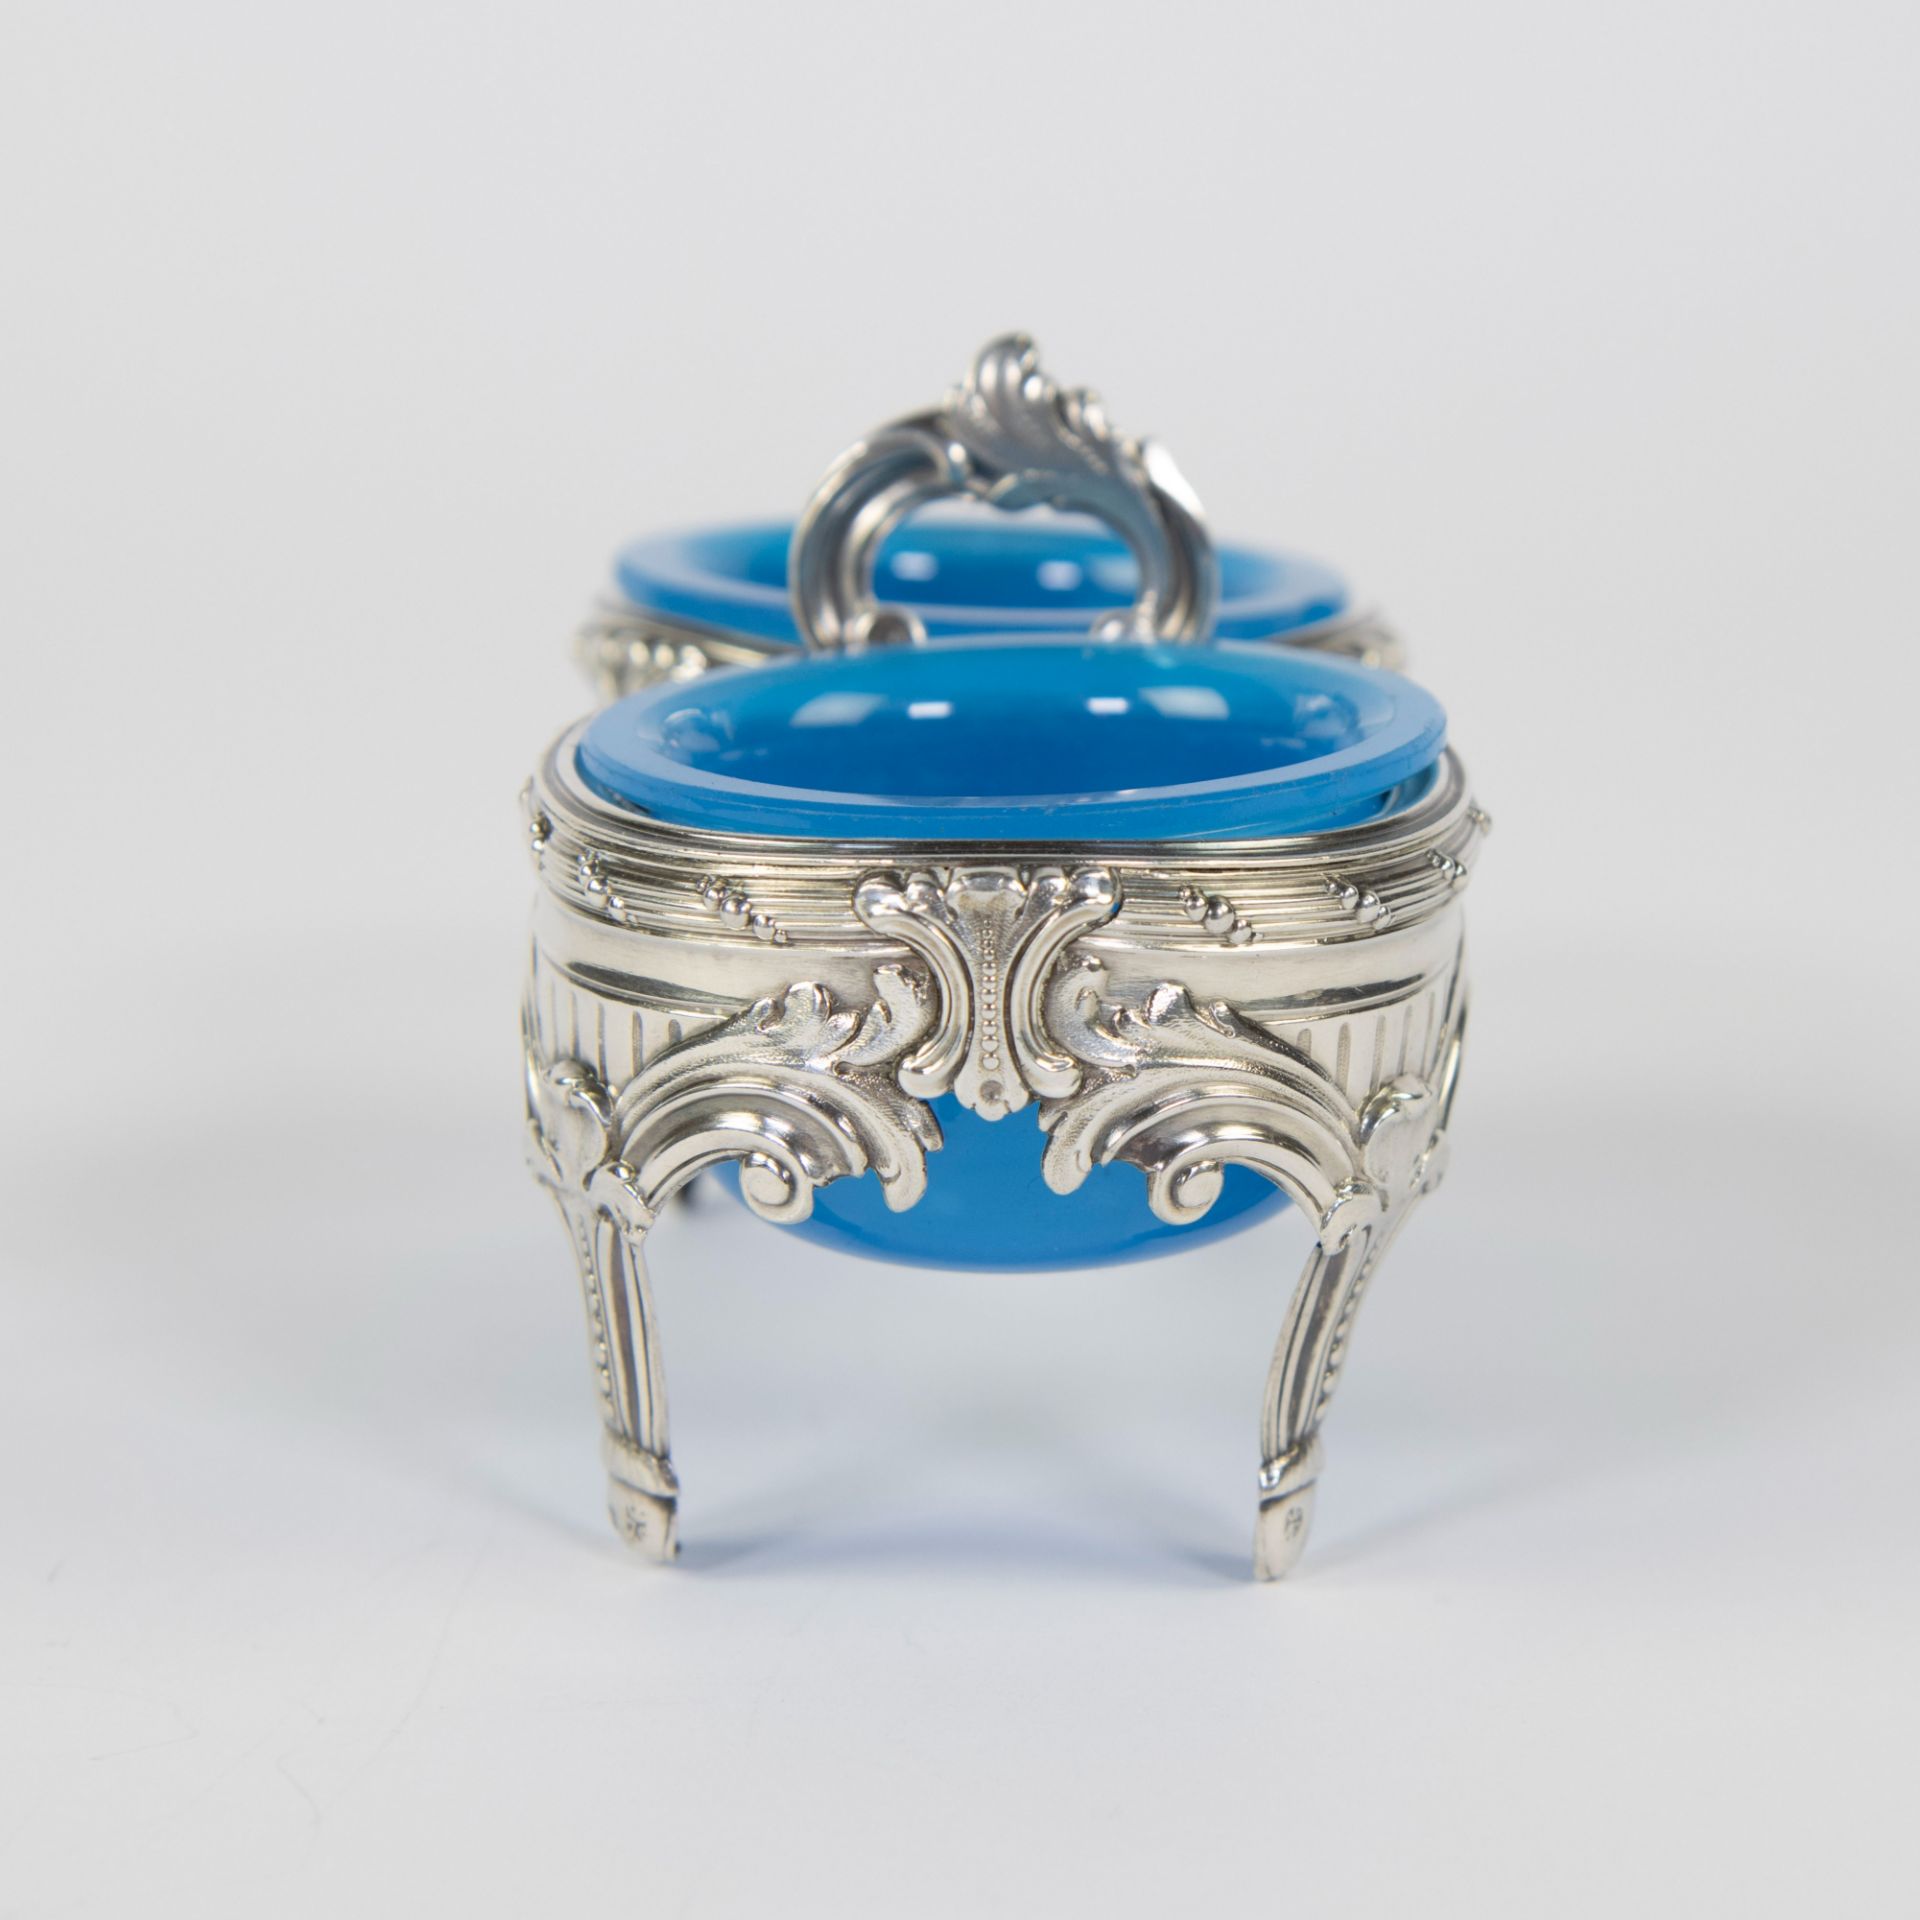 Silver salt cellar with light blue glass compartments, Mons, 18th century - Image 2 of 6